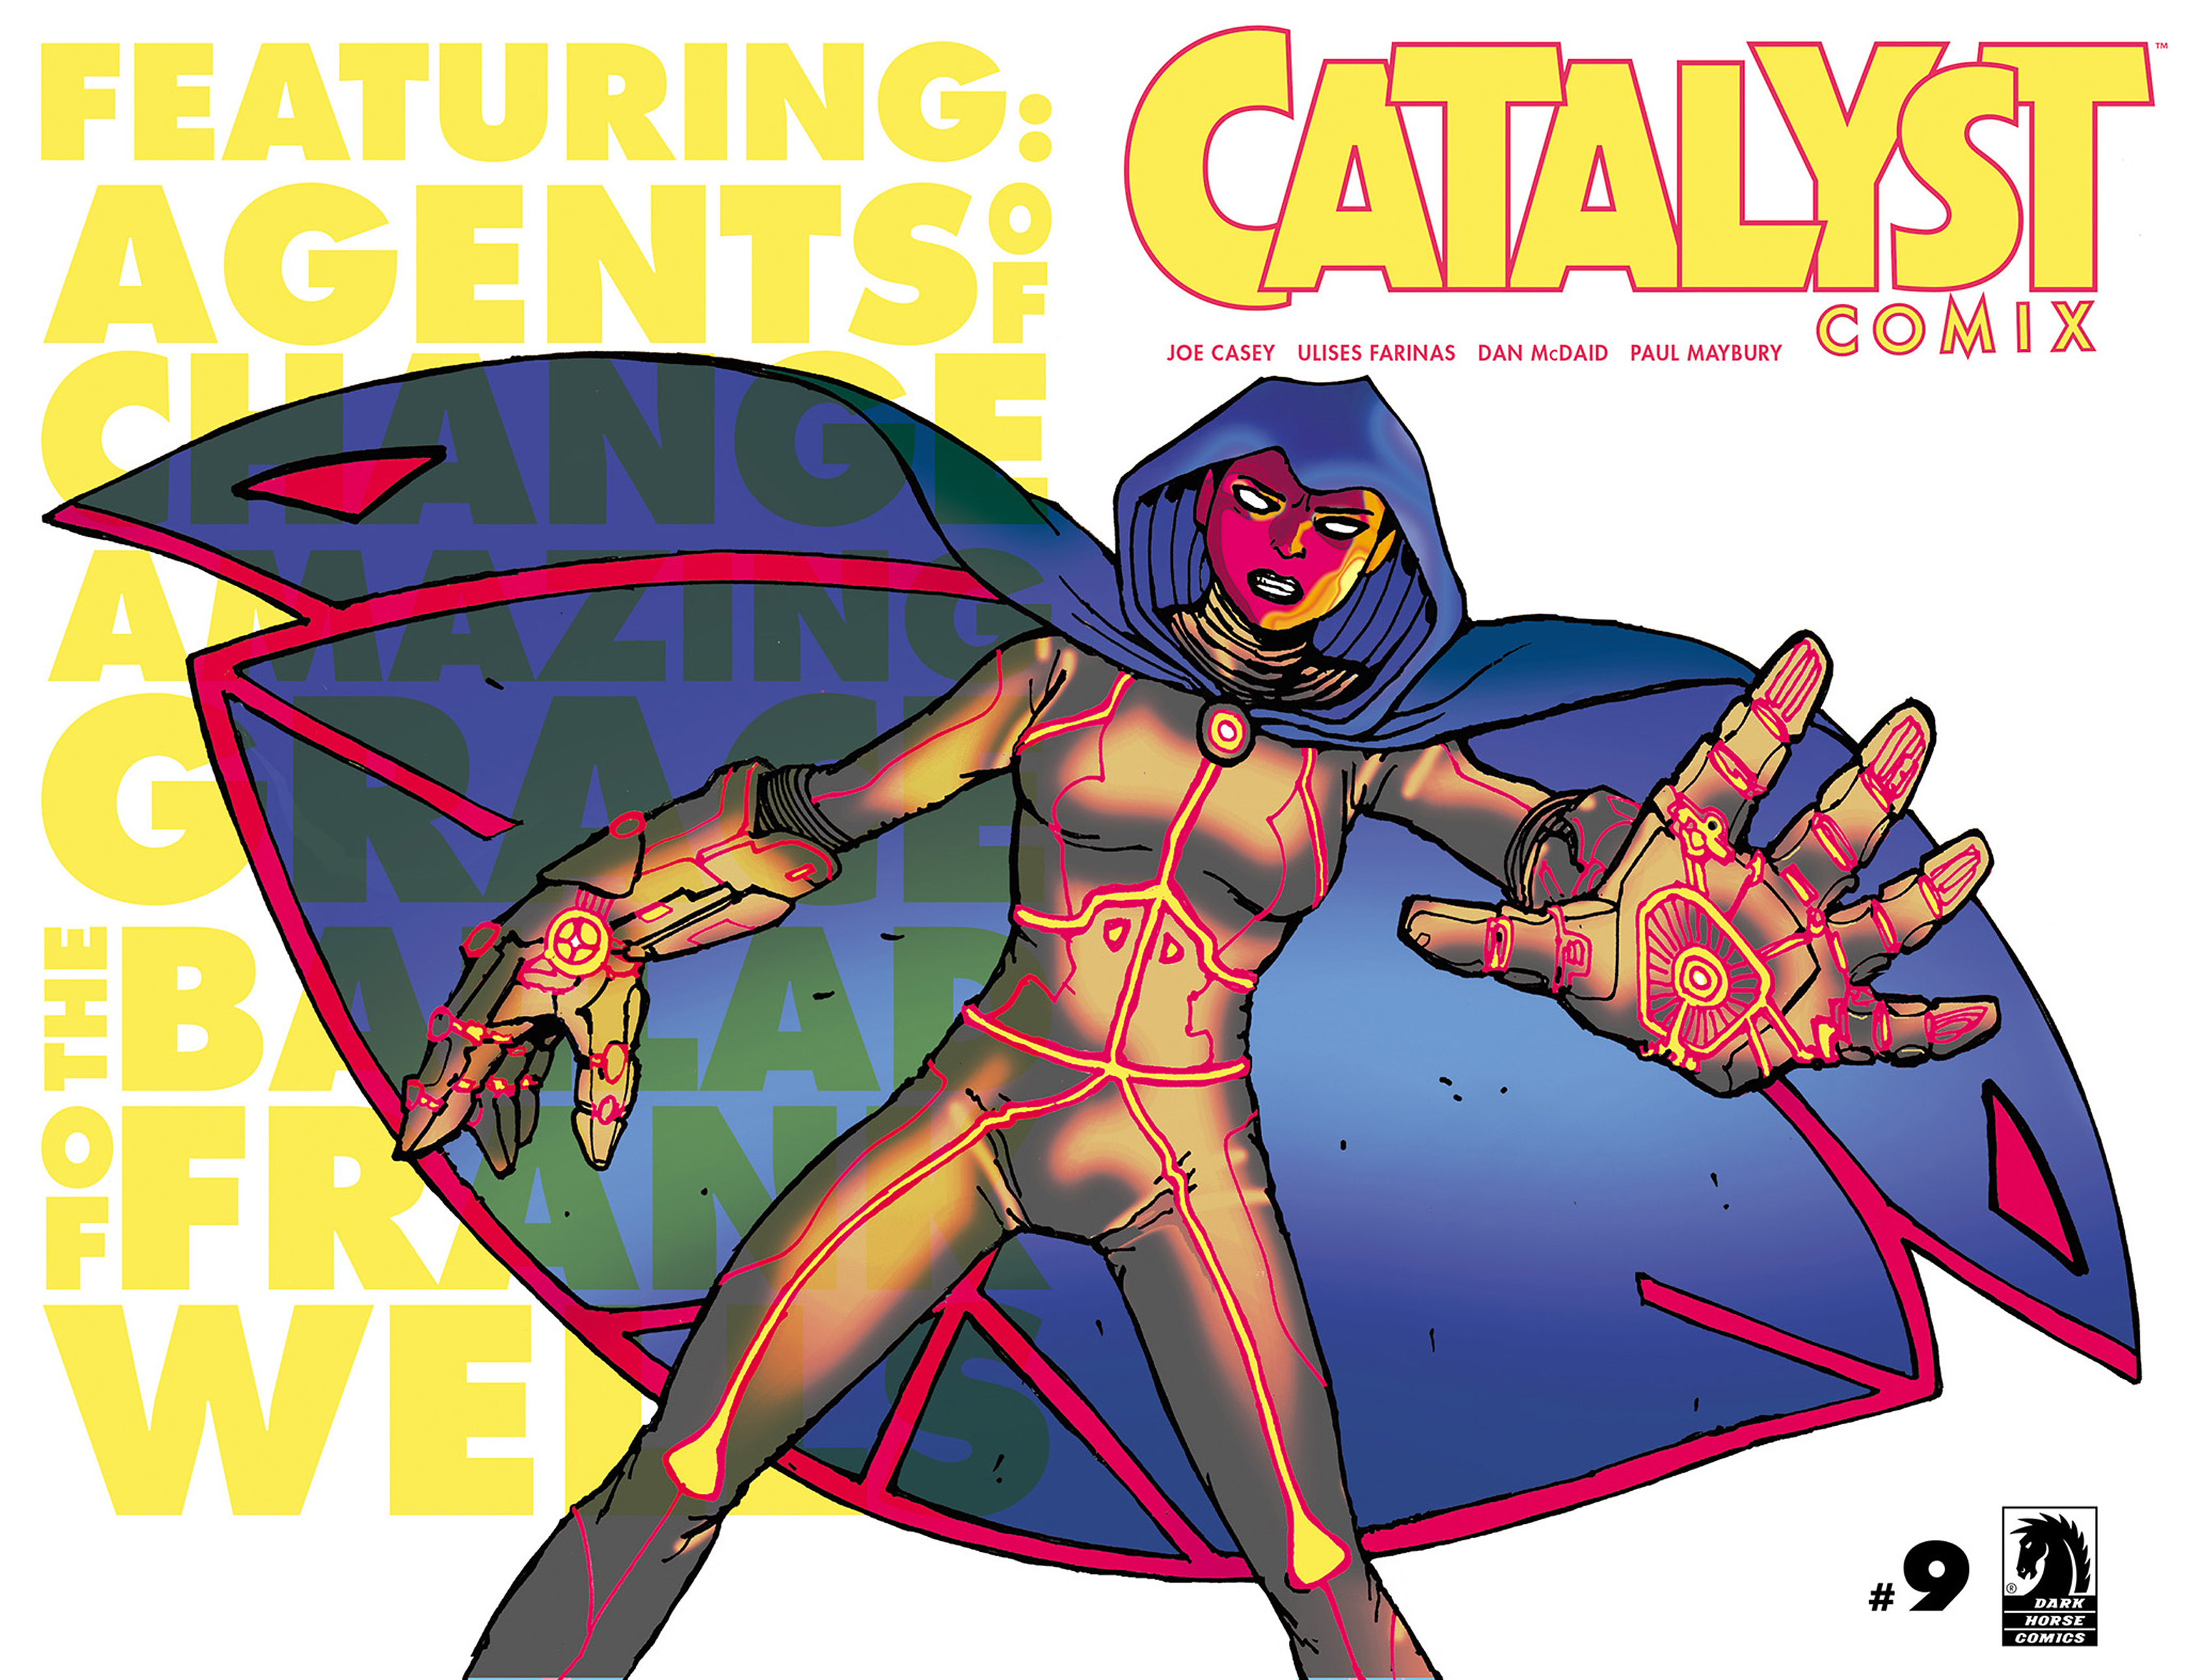 Read online Catalyst Comix comic -  Issue #9 - 2